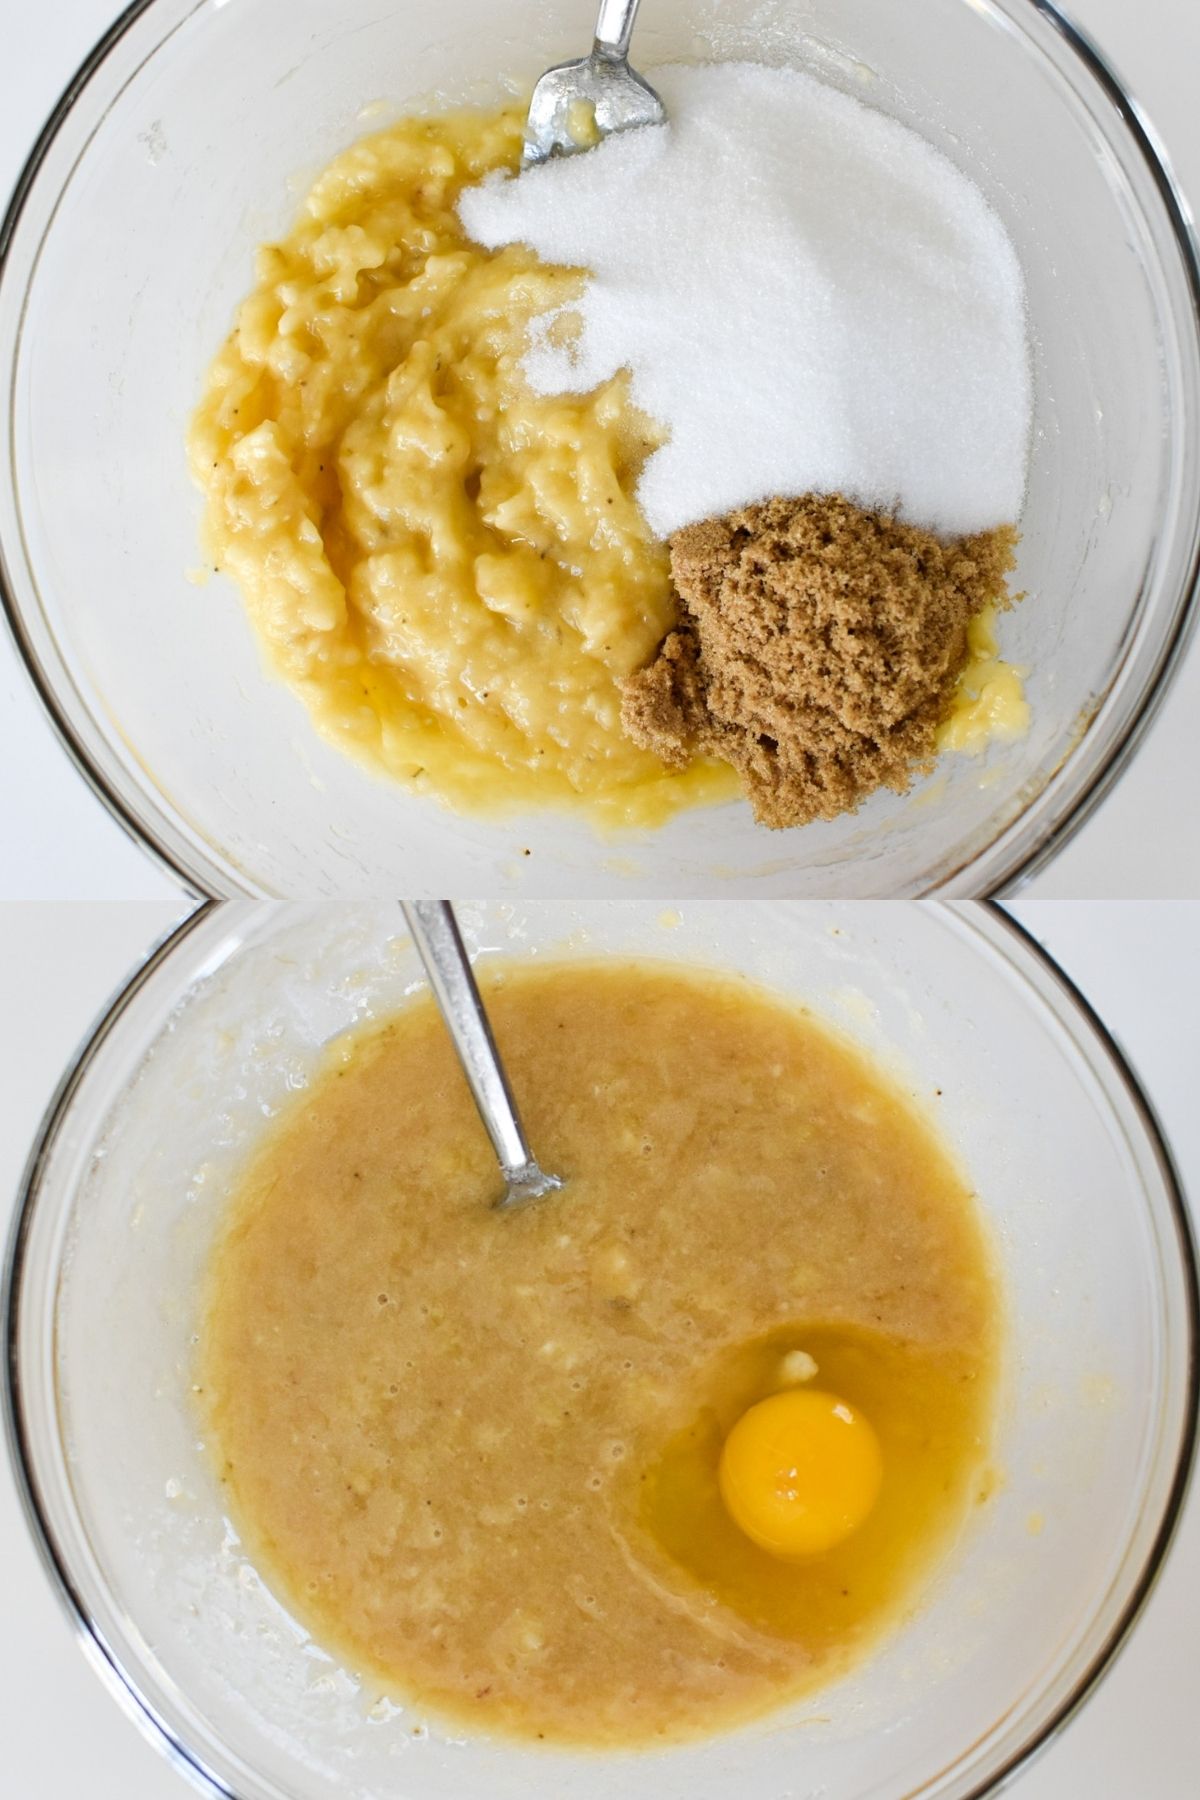 Mashed bananas, sugar and egg in a clear bowl.